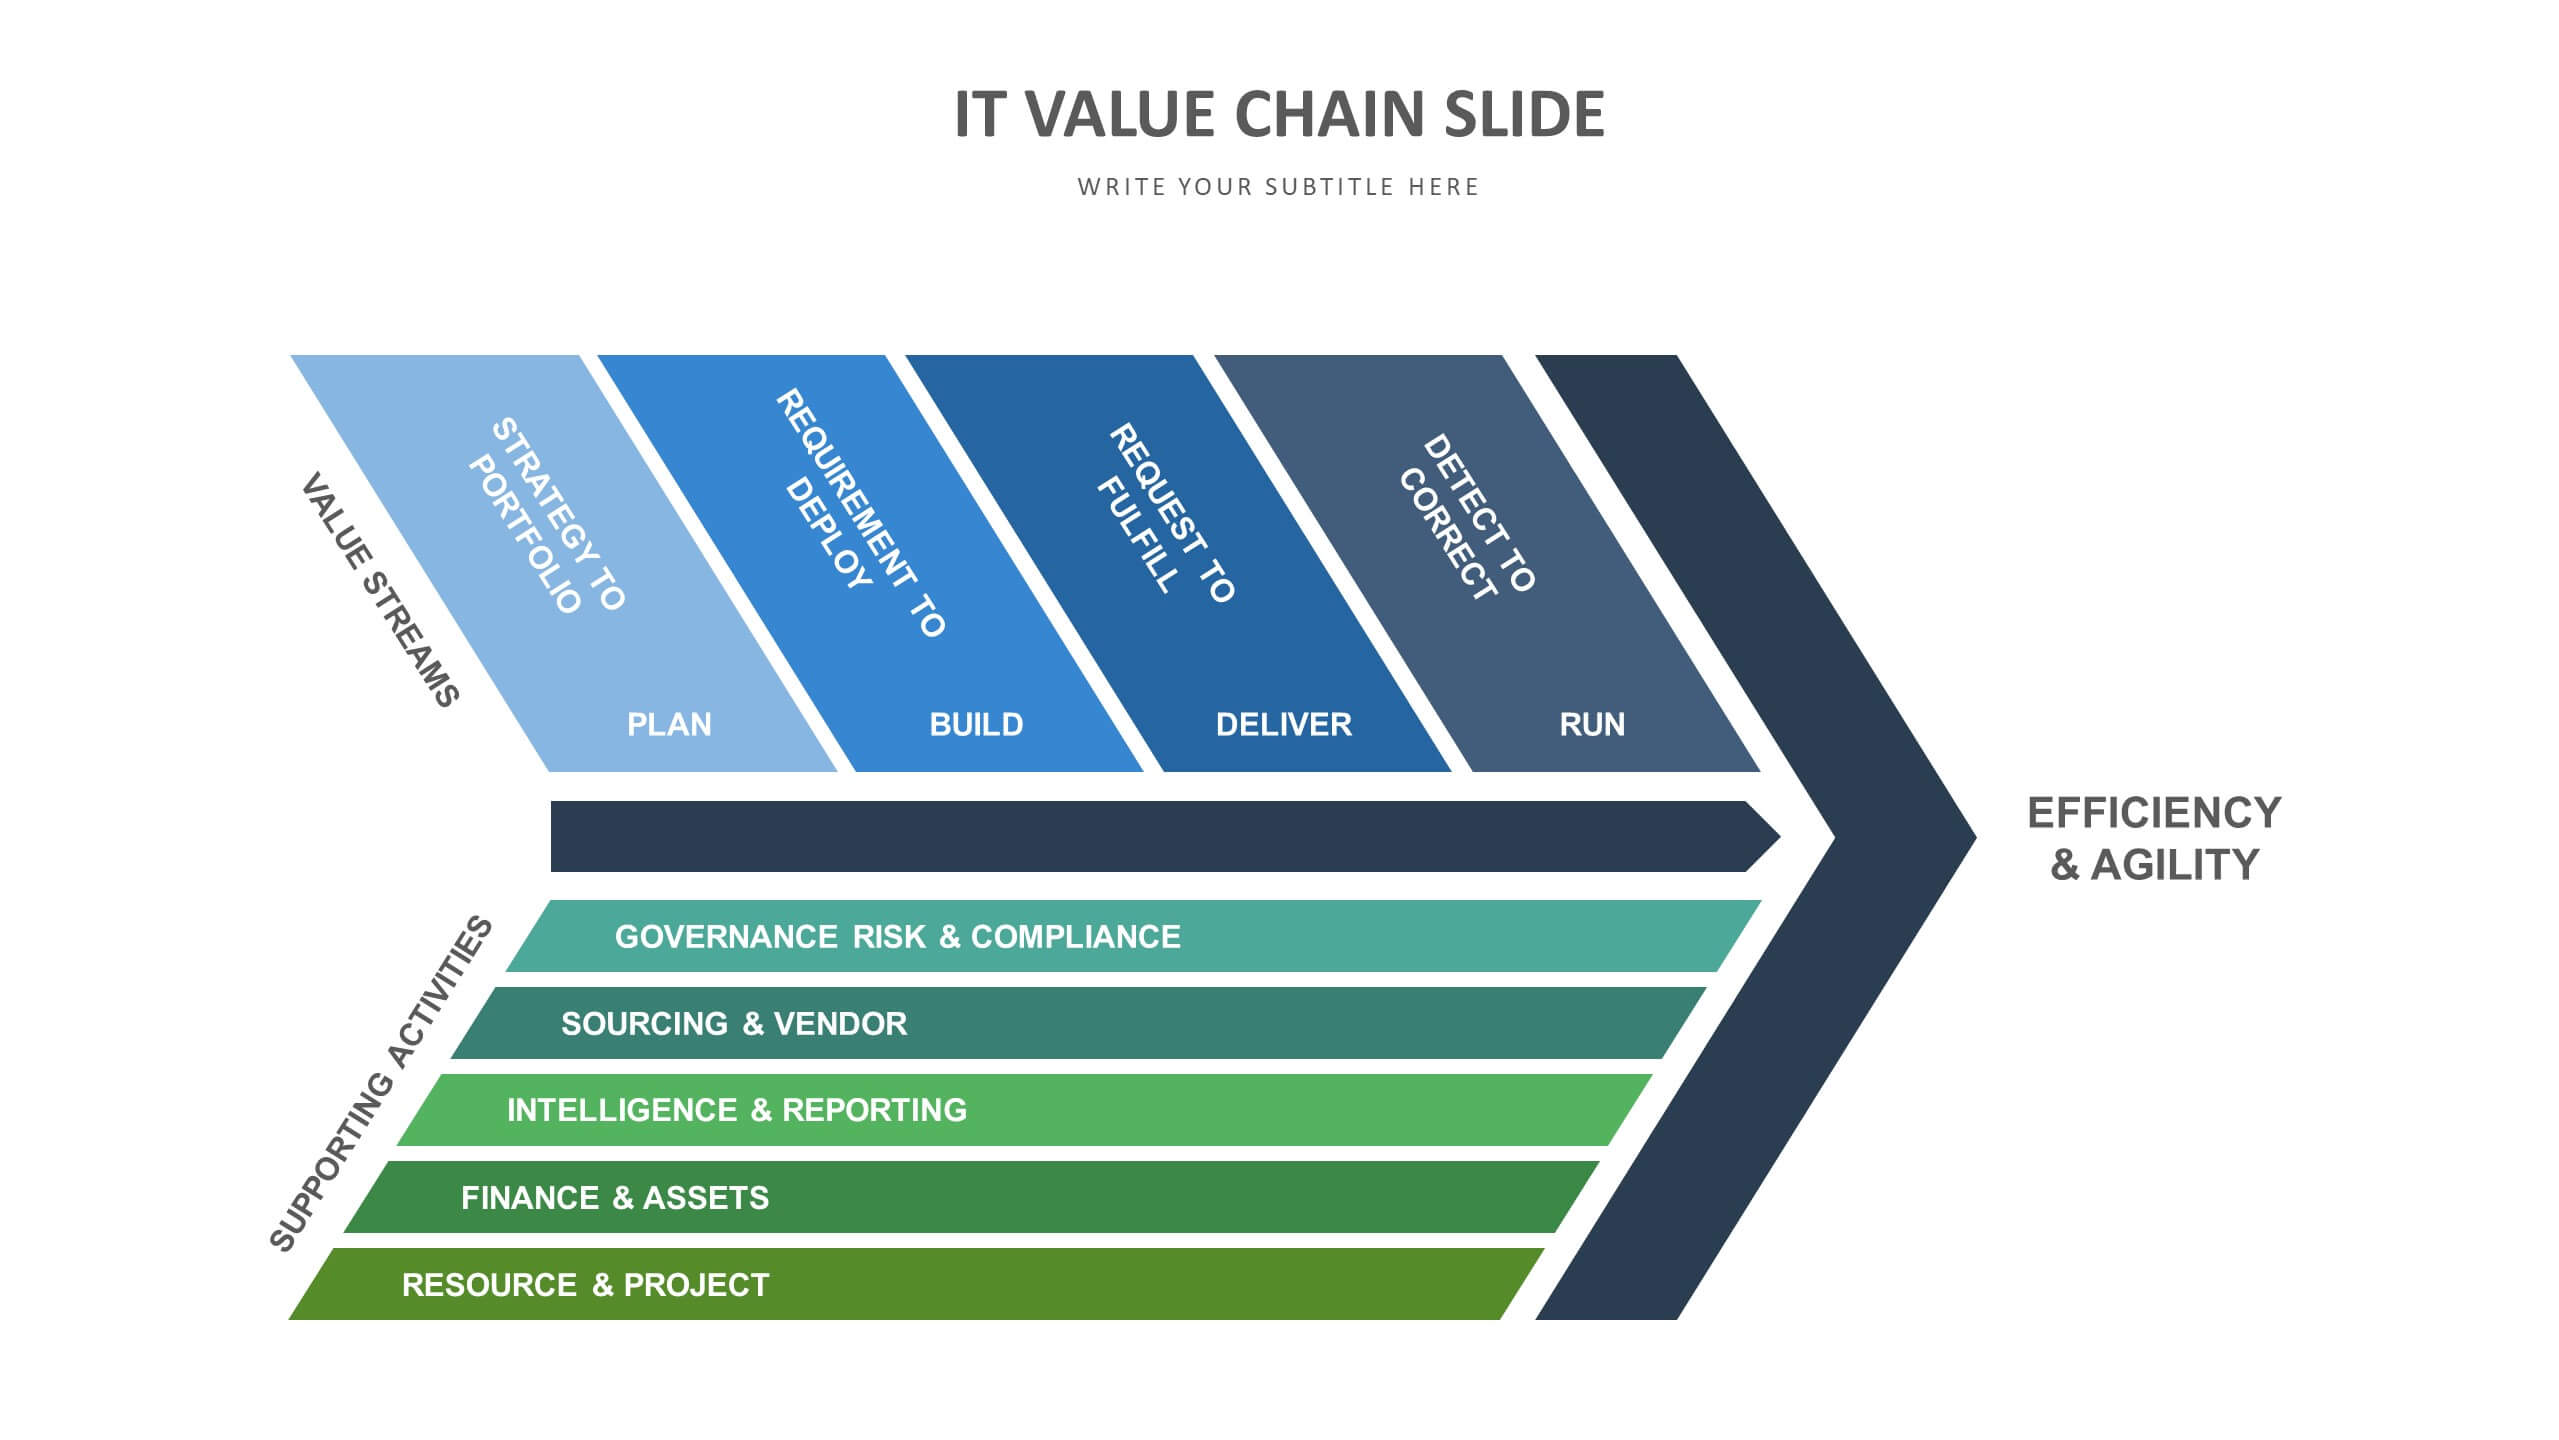 Value plan. Value Chain. Value Chain Template. Value Chain НЛМК. Value Chain вектор.